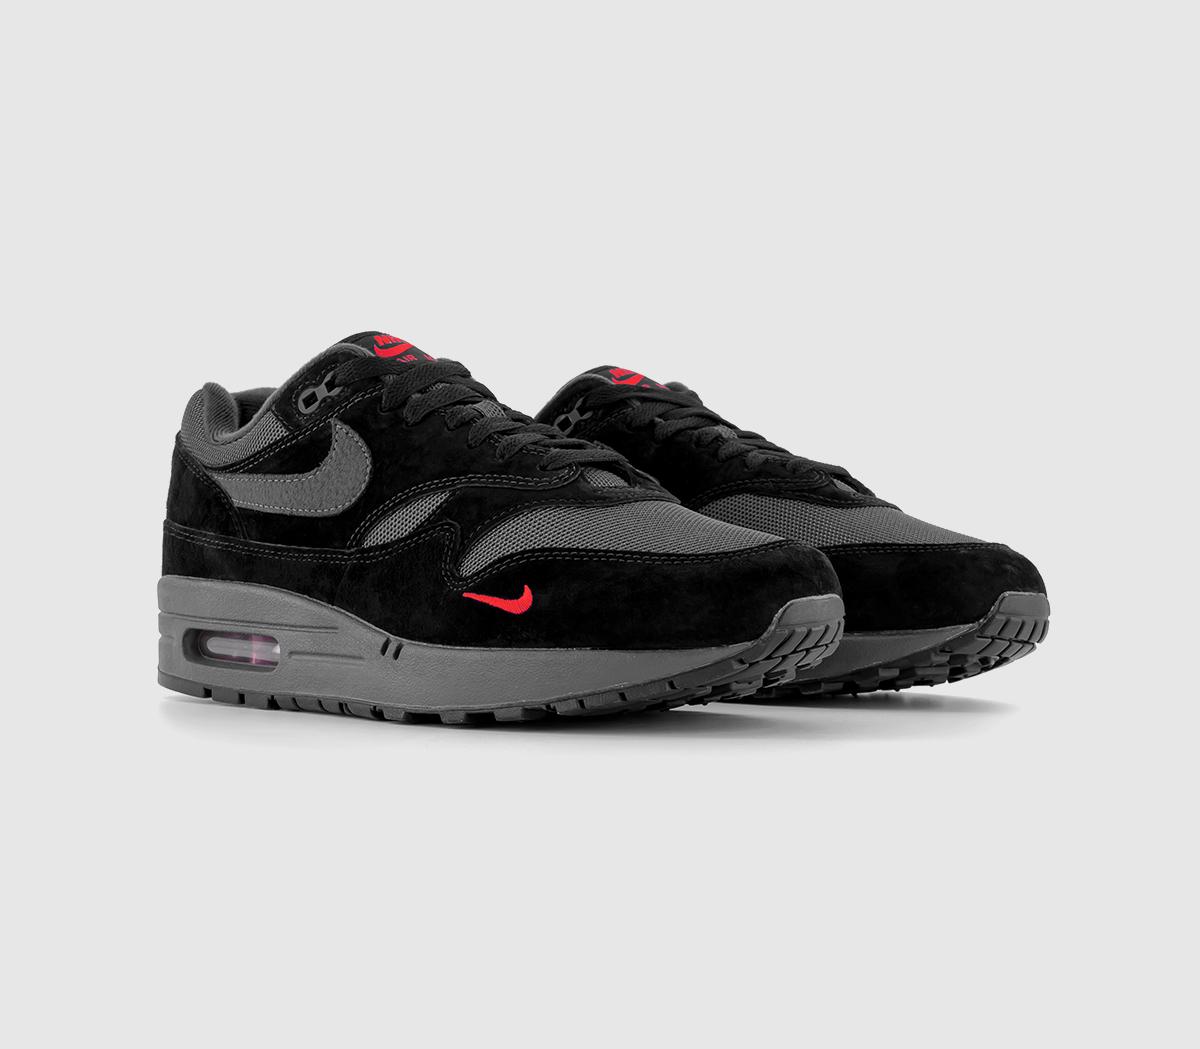 Nike Air Max 1 Trainers Black Anthracite University Red, 10